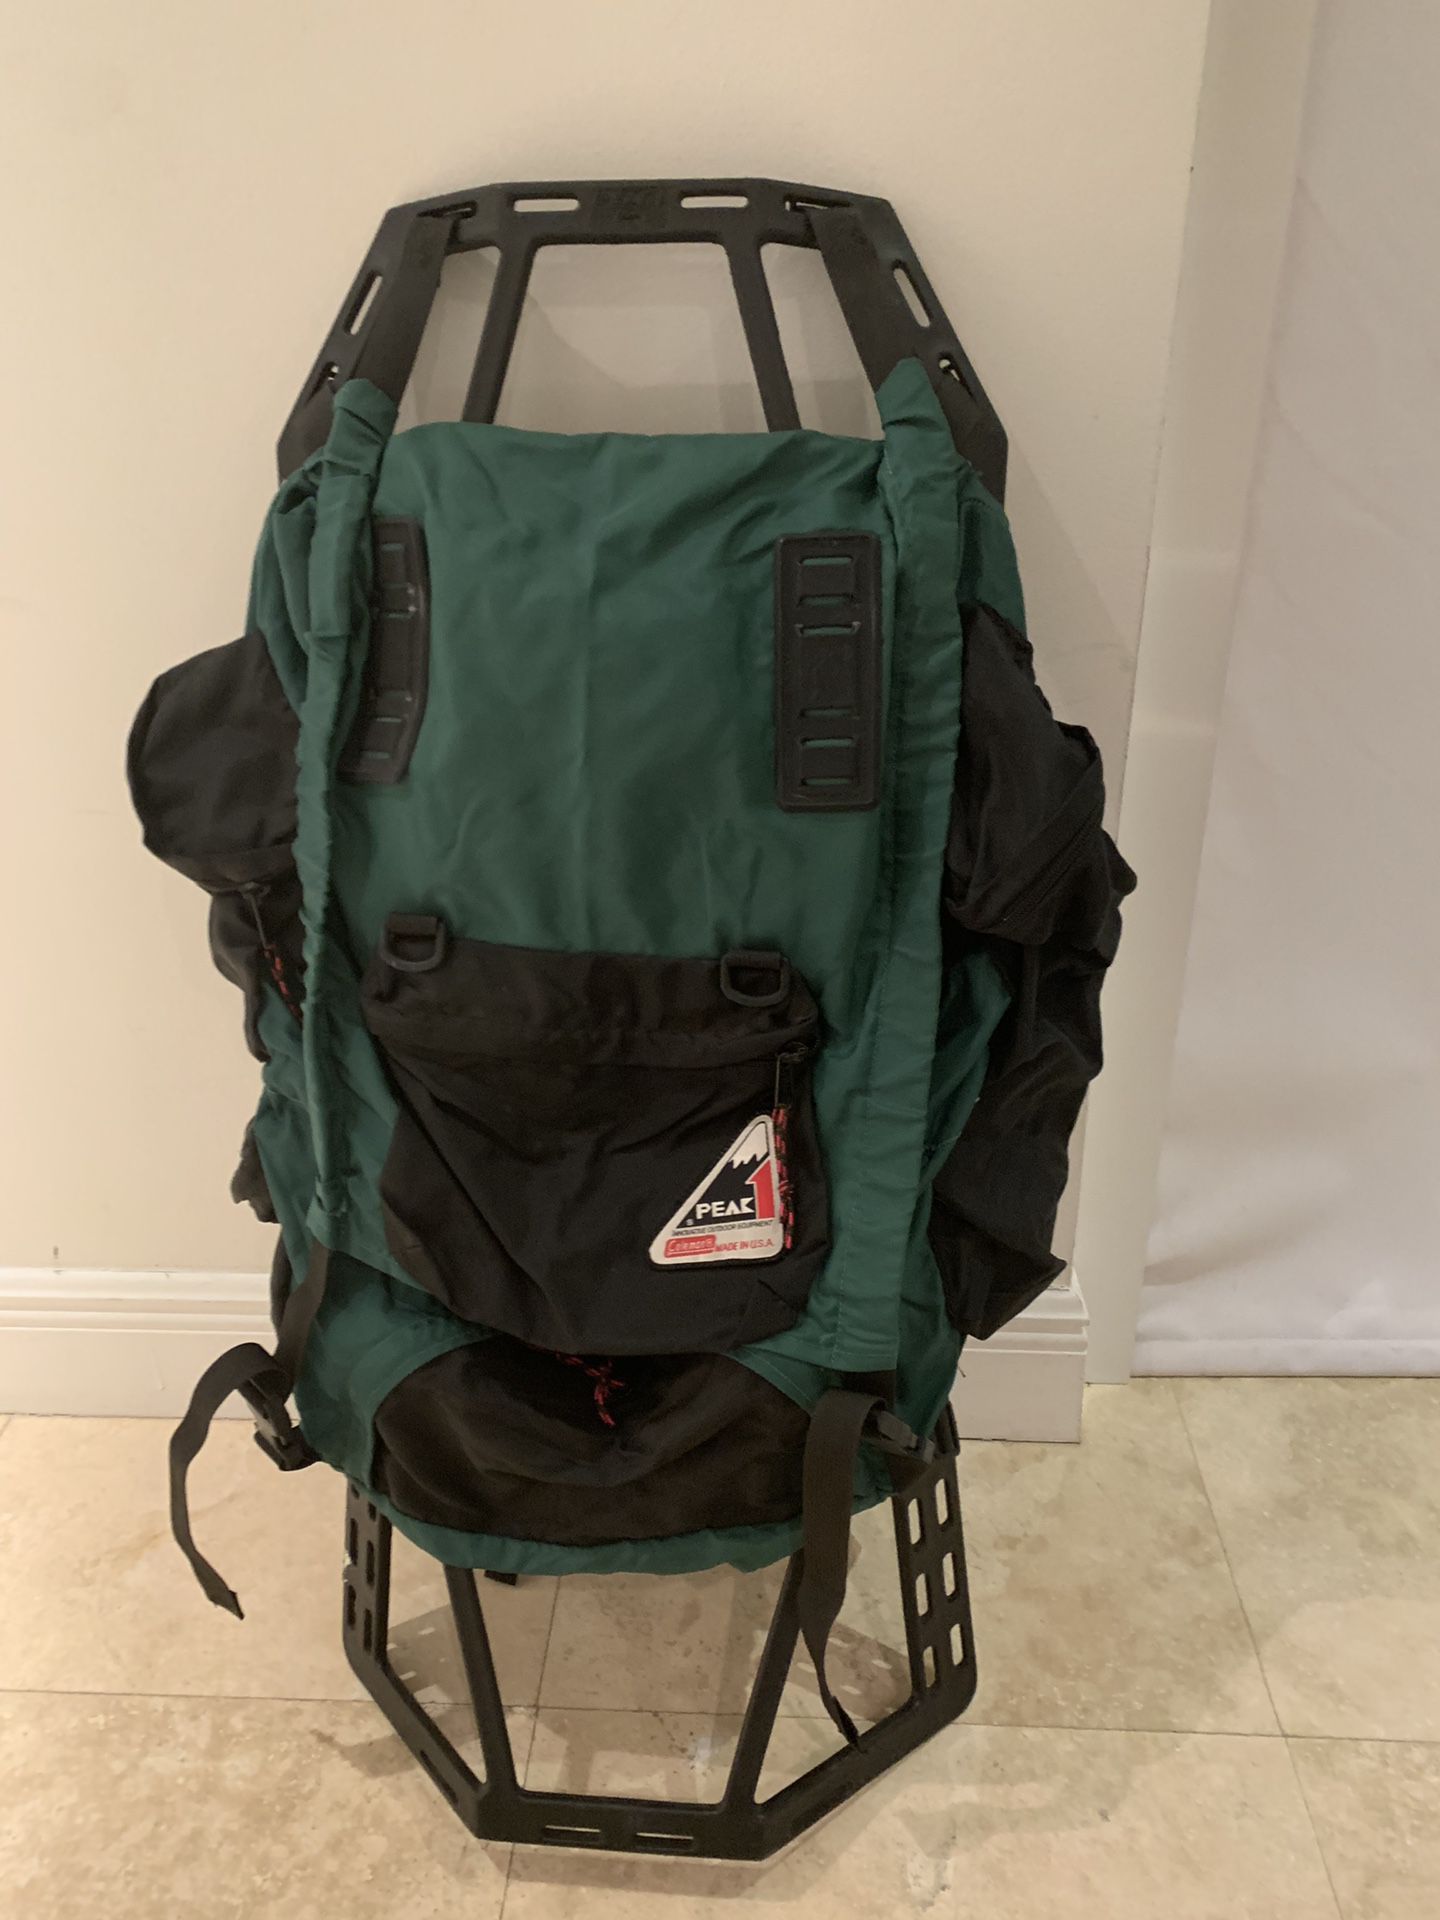 Coleman Peak XL BackPack with Internal Frame and Back-support- Hiking, Camping, Climbing. Made in the USA